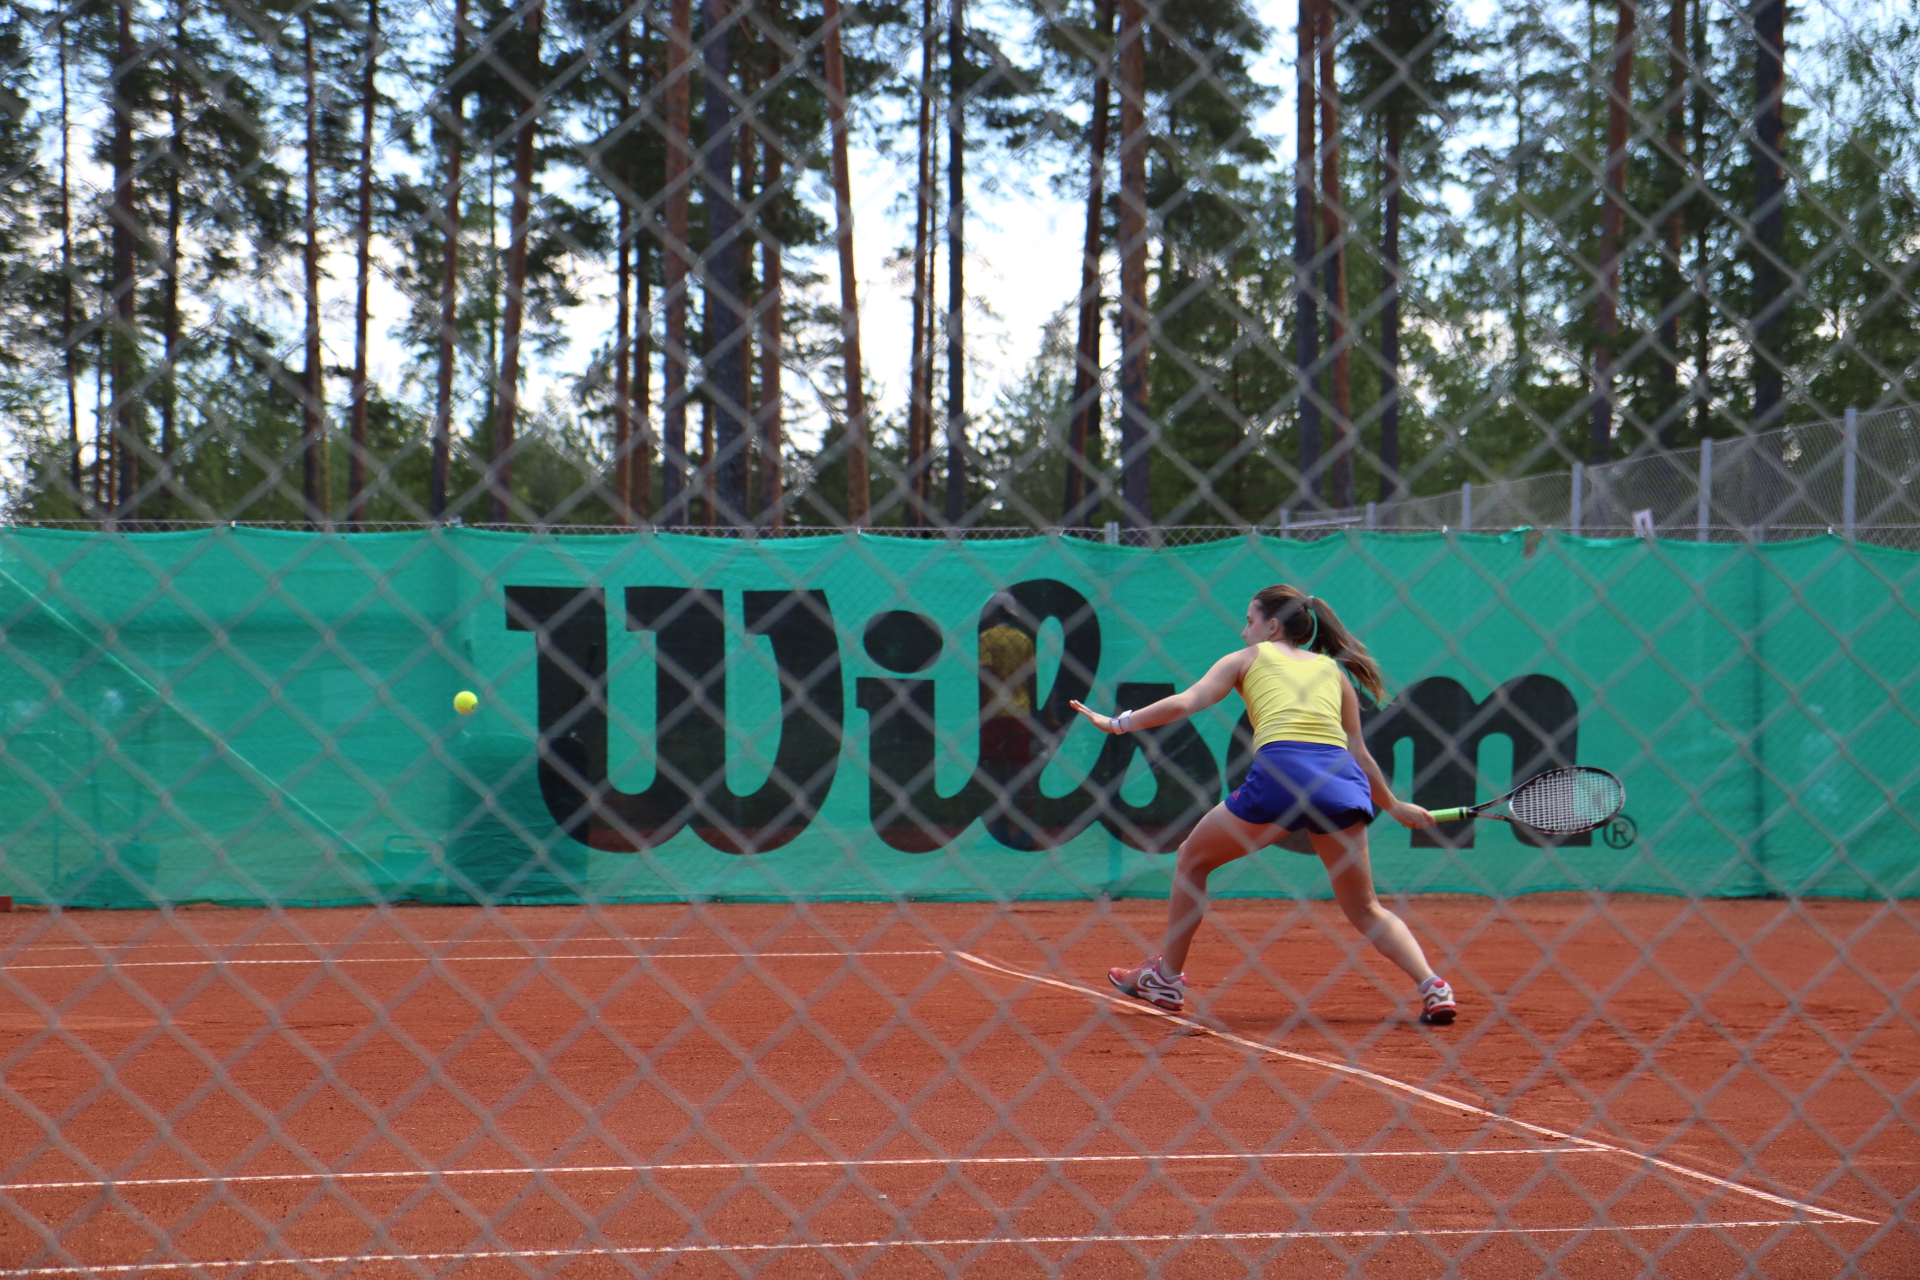 Playing a smart forehand on a crucial point